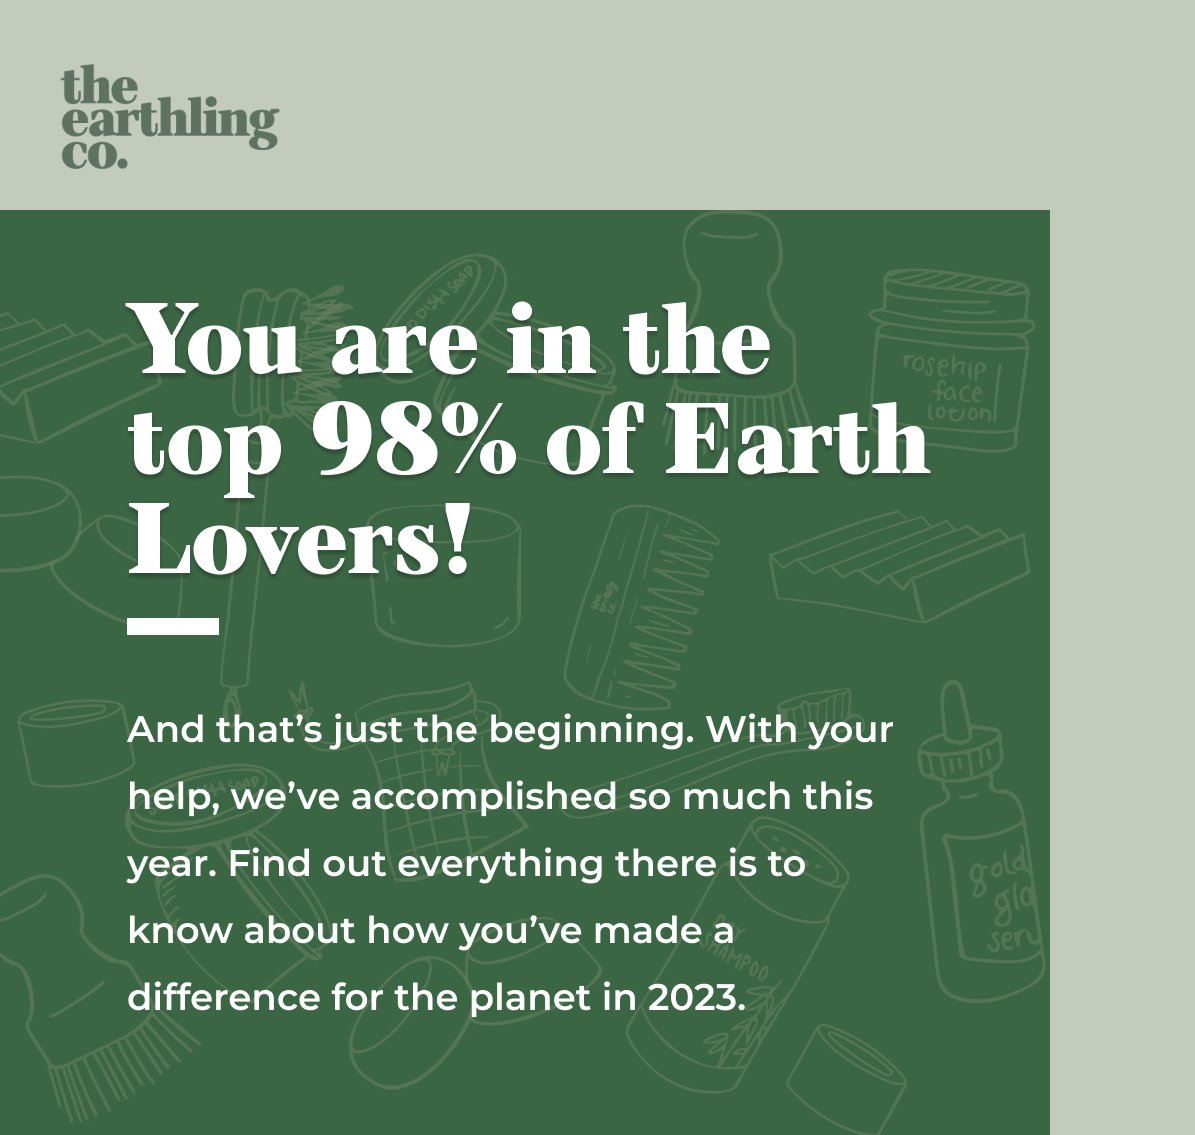 You are in the top 98% of Earth Lovers!